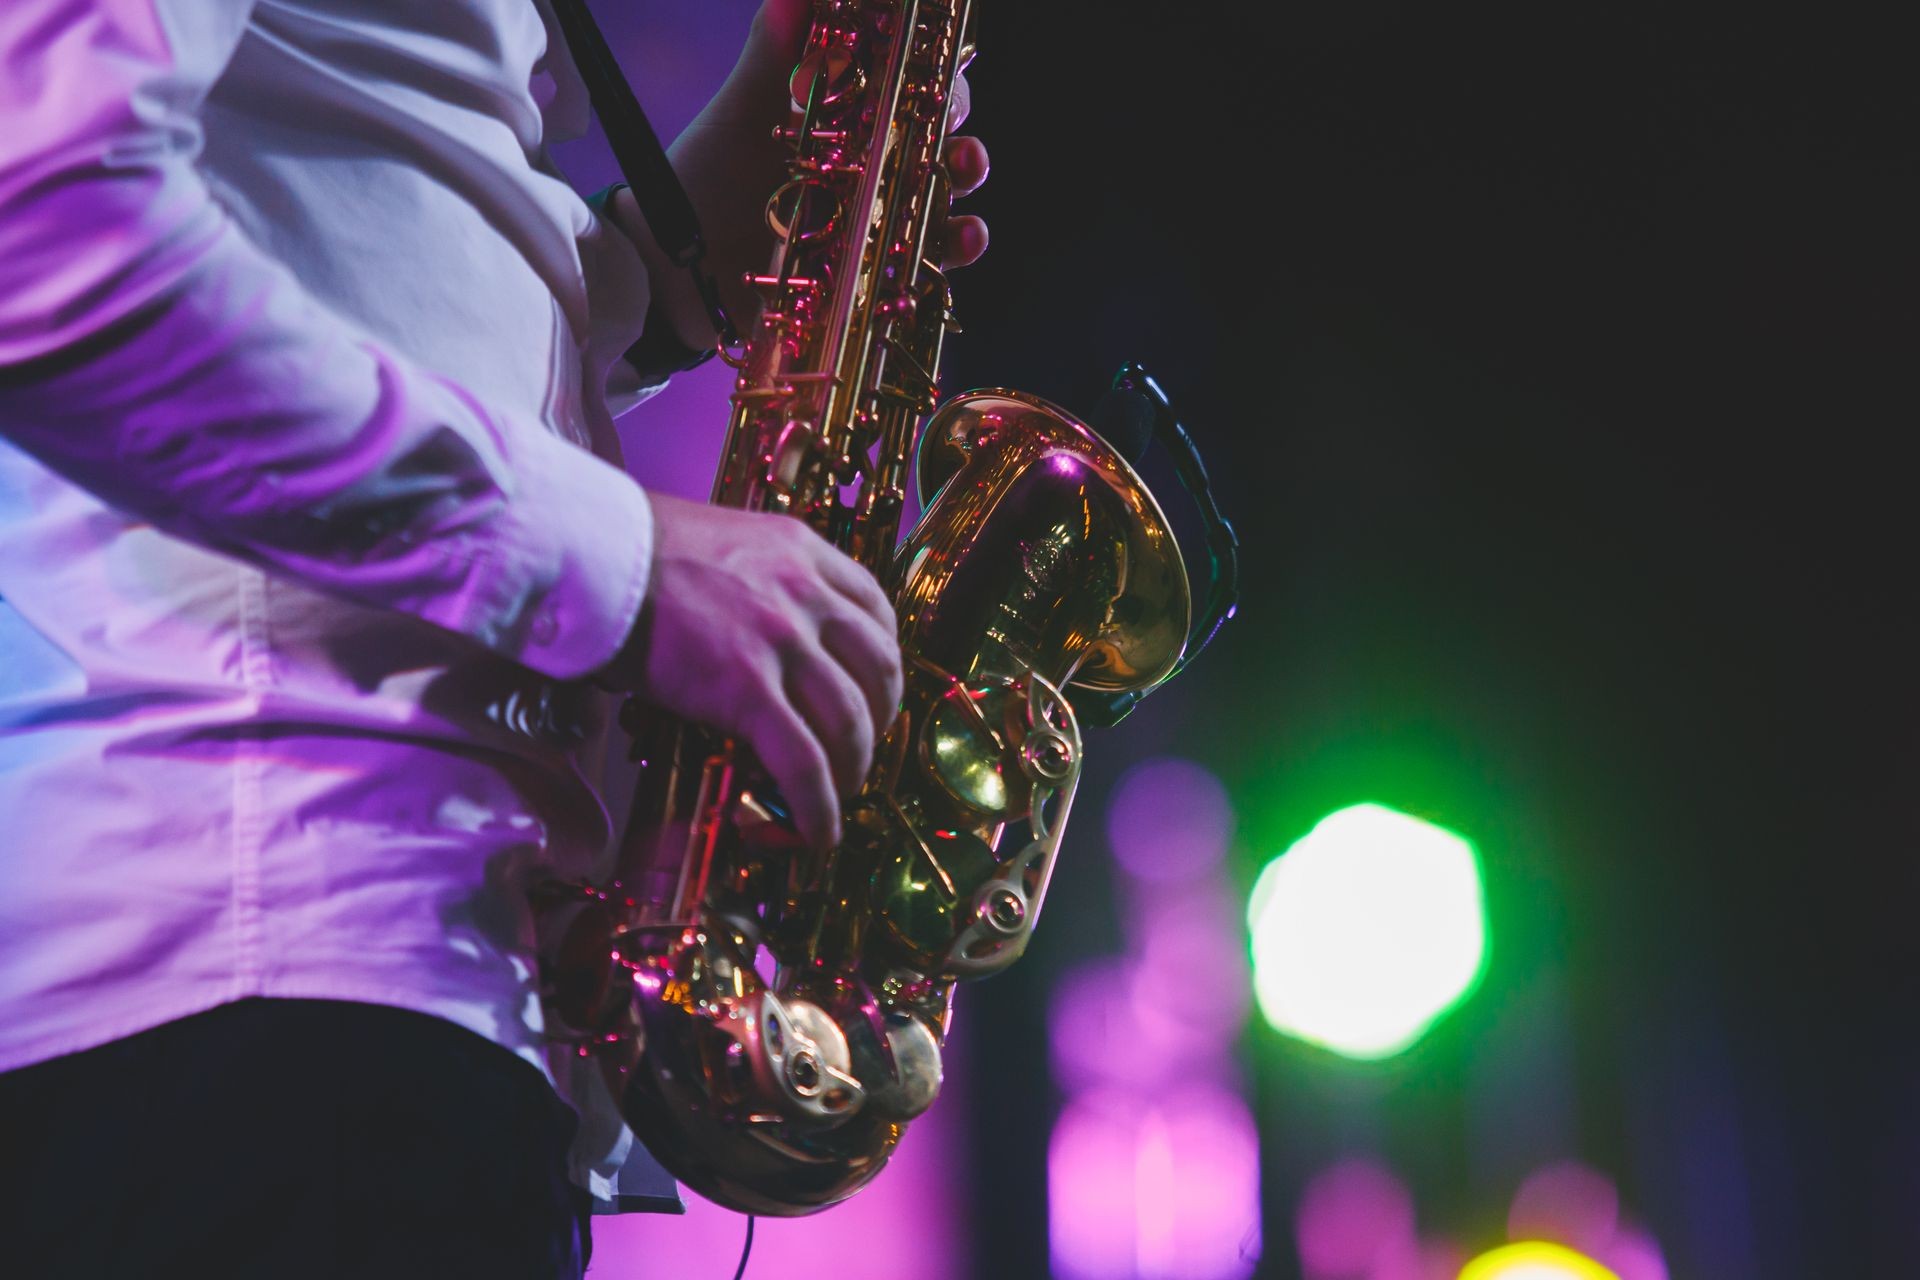 Concert view of a saxophone player with vocalist and musical jazz band in the background
